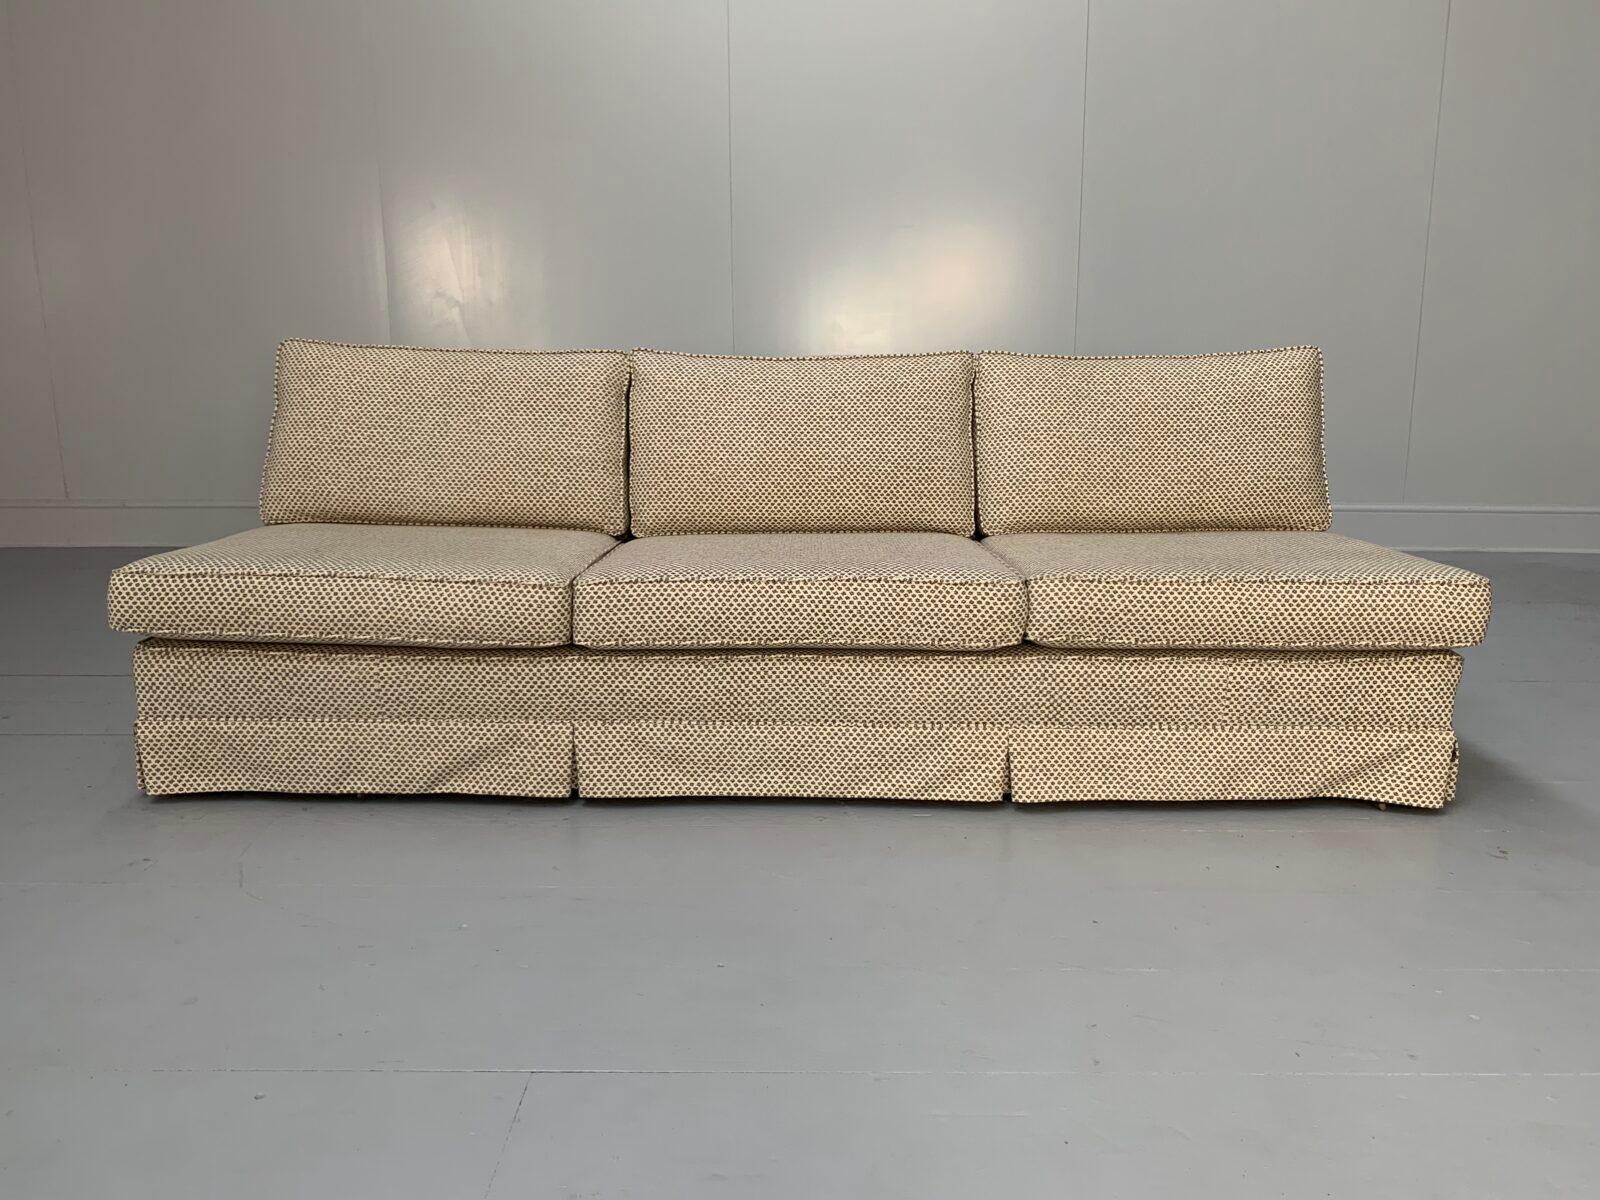 Hello Friends, and welcome to another unmissable offering from Lord Browns Furniture, the UK’s premier resource for fine Sofas and Chairs.

On offer on this occasion is a superb, immaculate Parker and Farr “Armless” 3-Seat Sofa, dressed in a